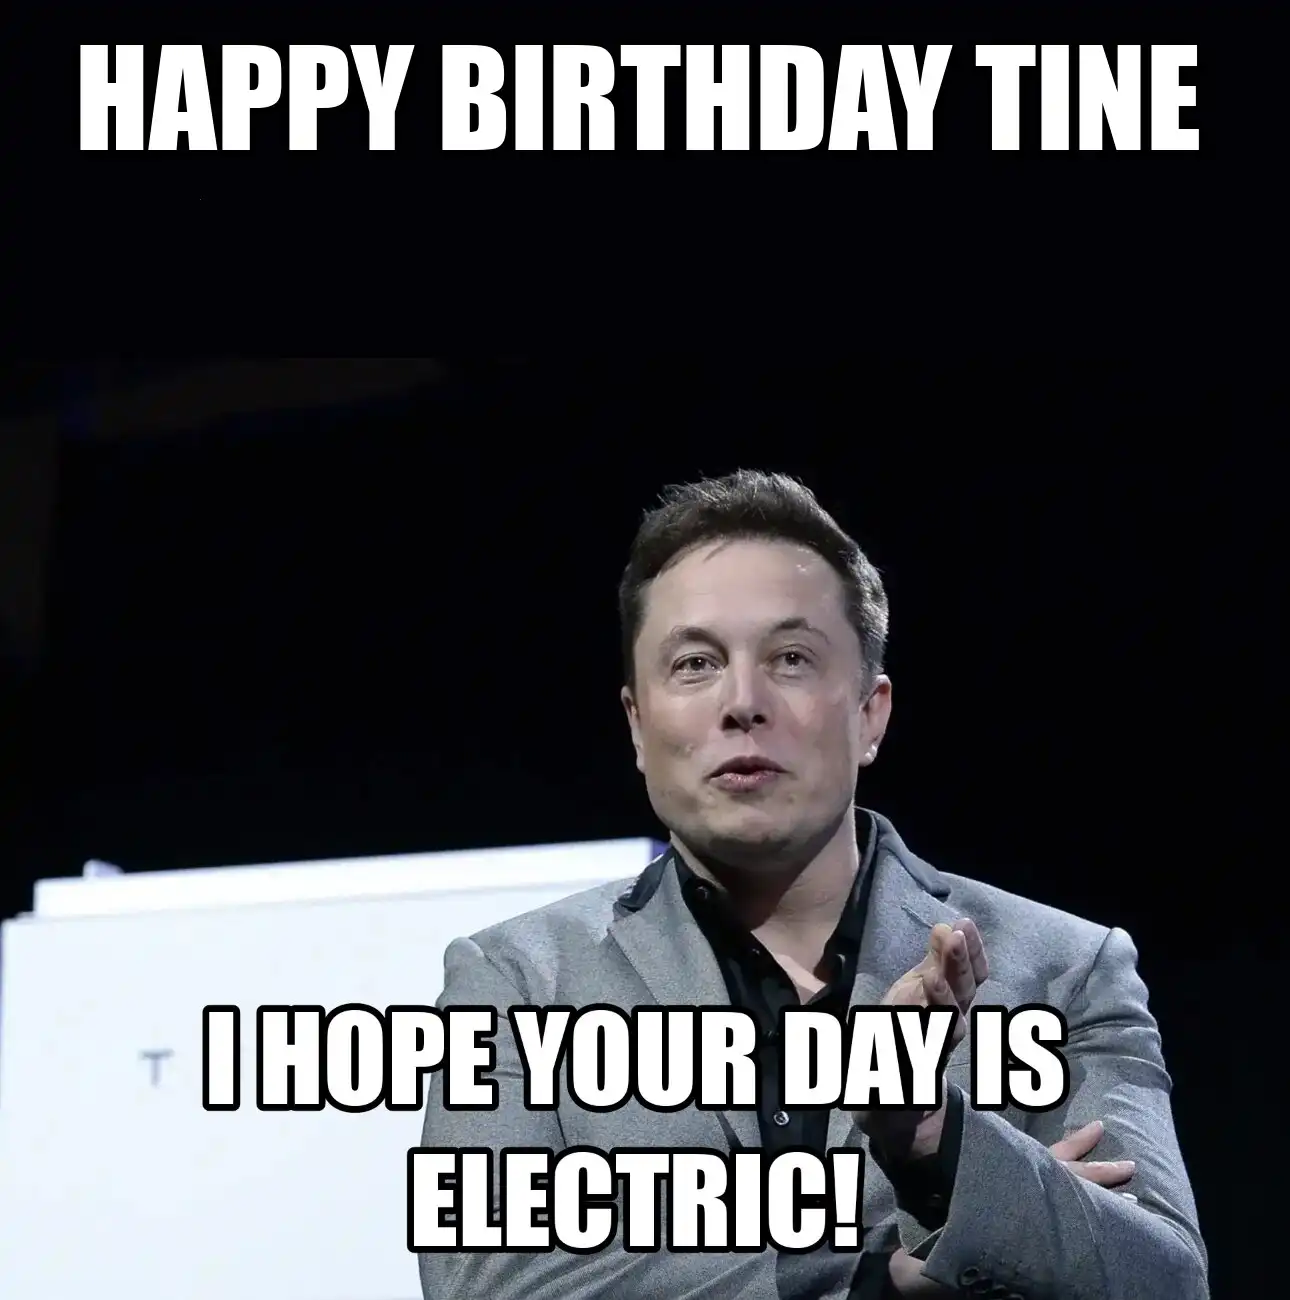 Happy Birthday Tine I Hope Your Day Is Electric Meme